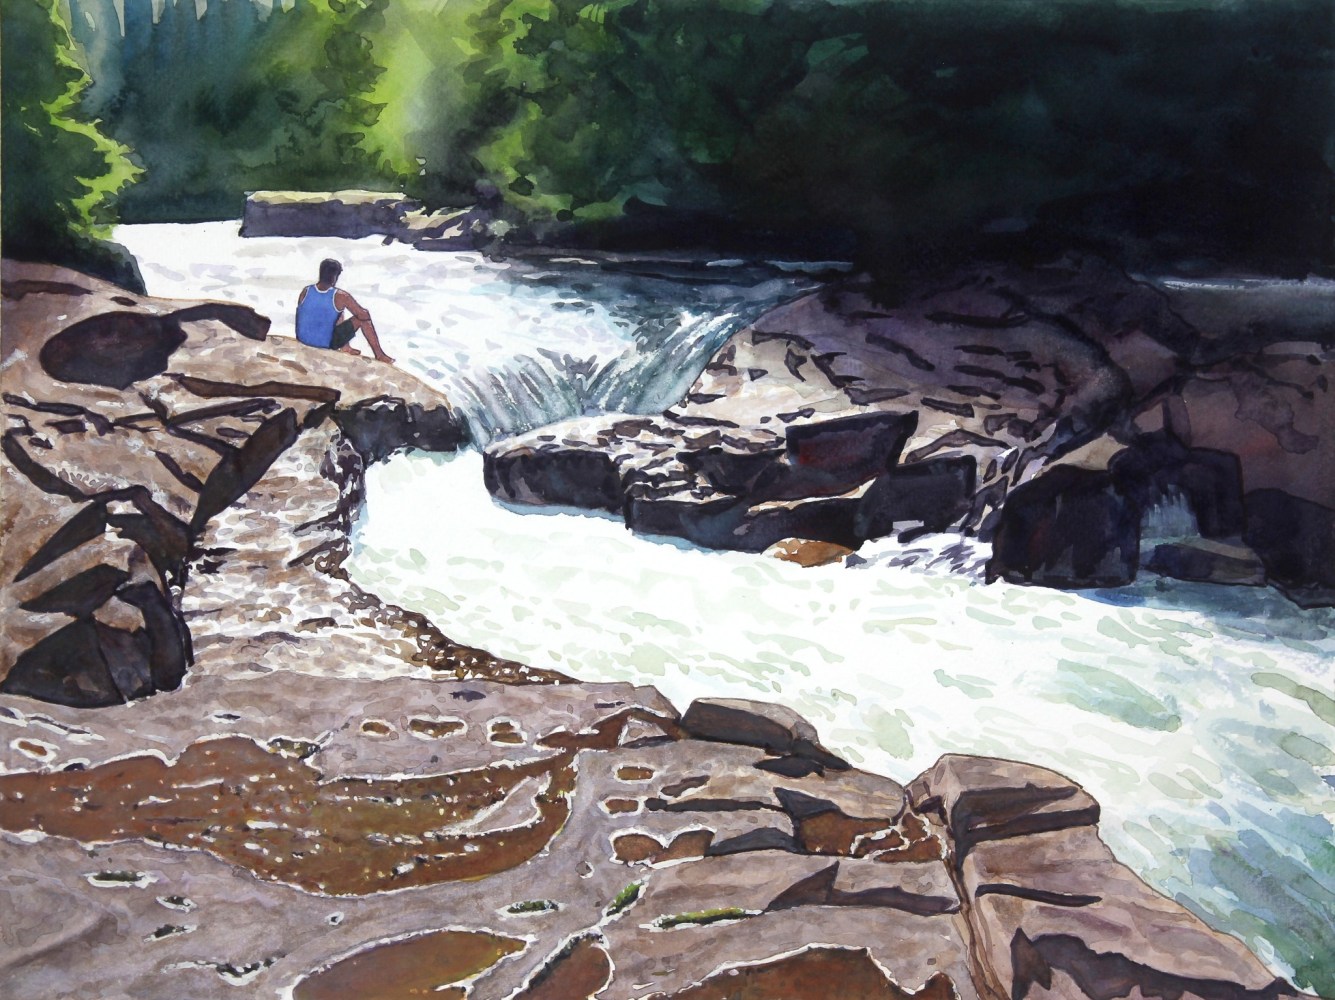 Tim Gardner

Man Sitting by River

2020

Watercolor on paper

11 3/4&amp;nbsp; x 15 3/4 inches (29.8 x 40 cm)

TG 592

&amp;nbsp;

INQUIRE